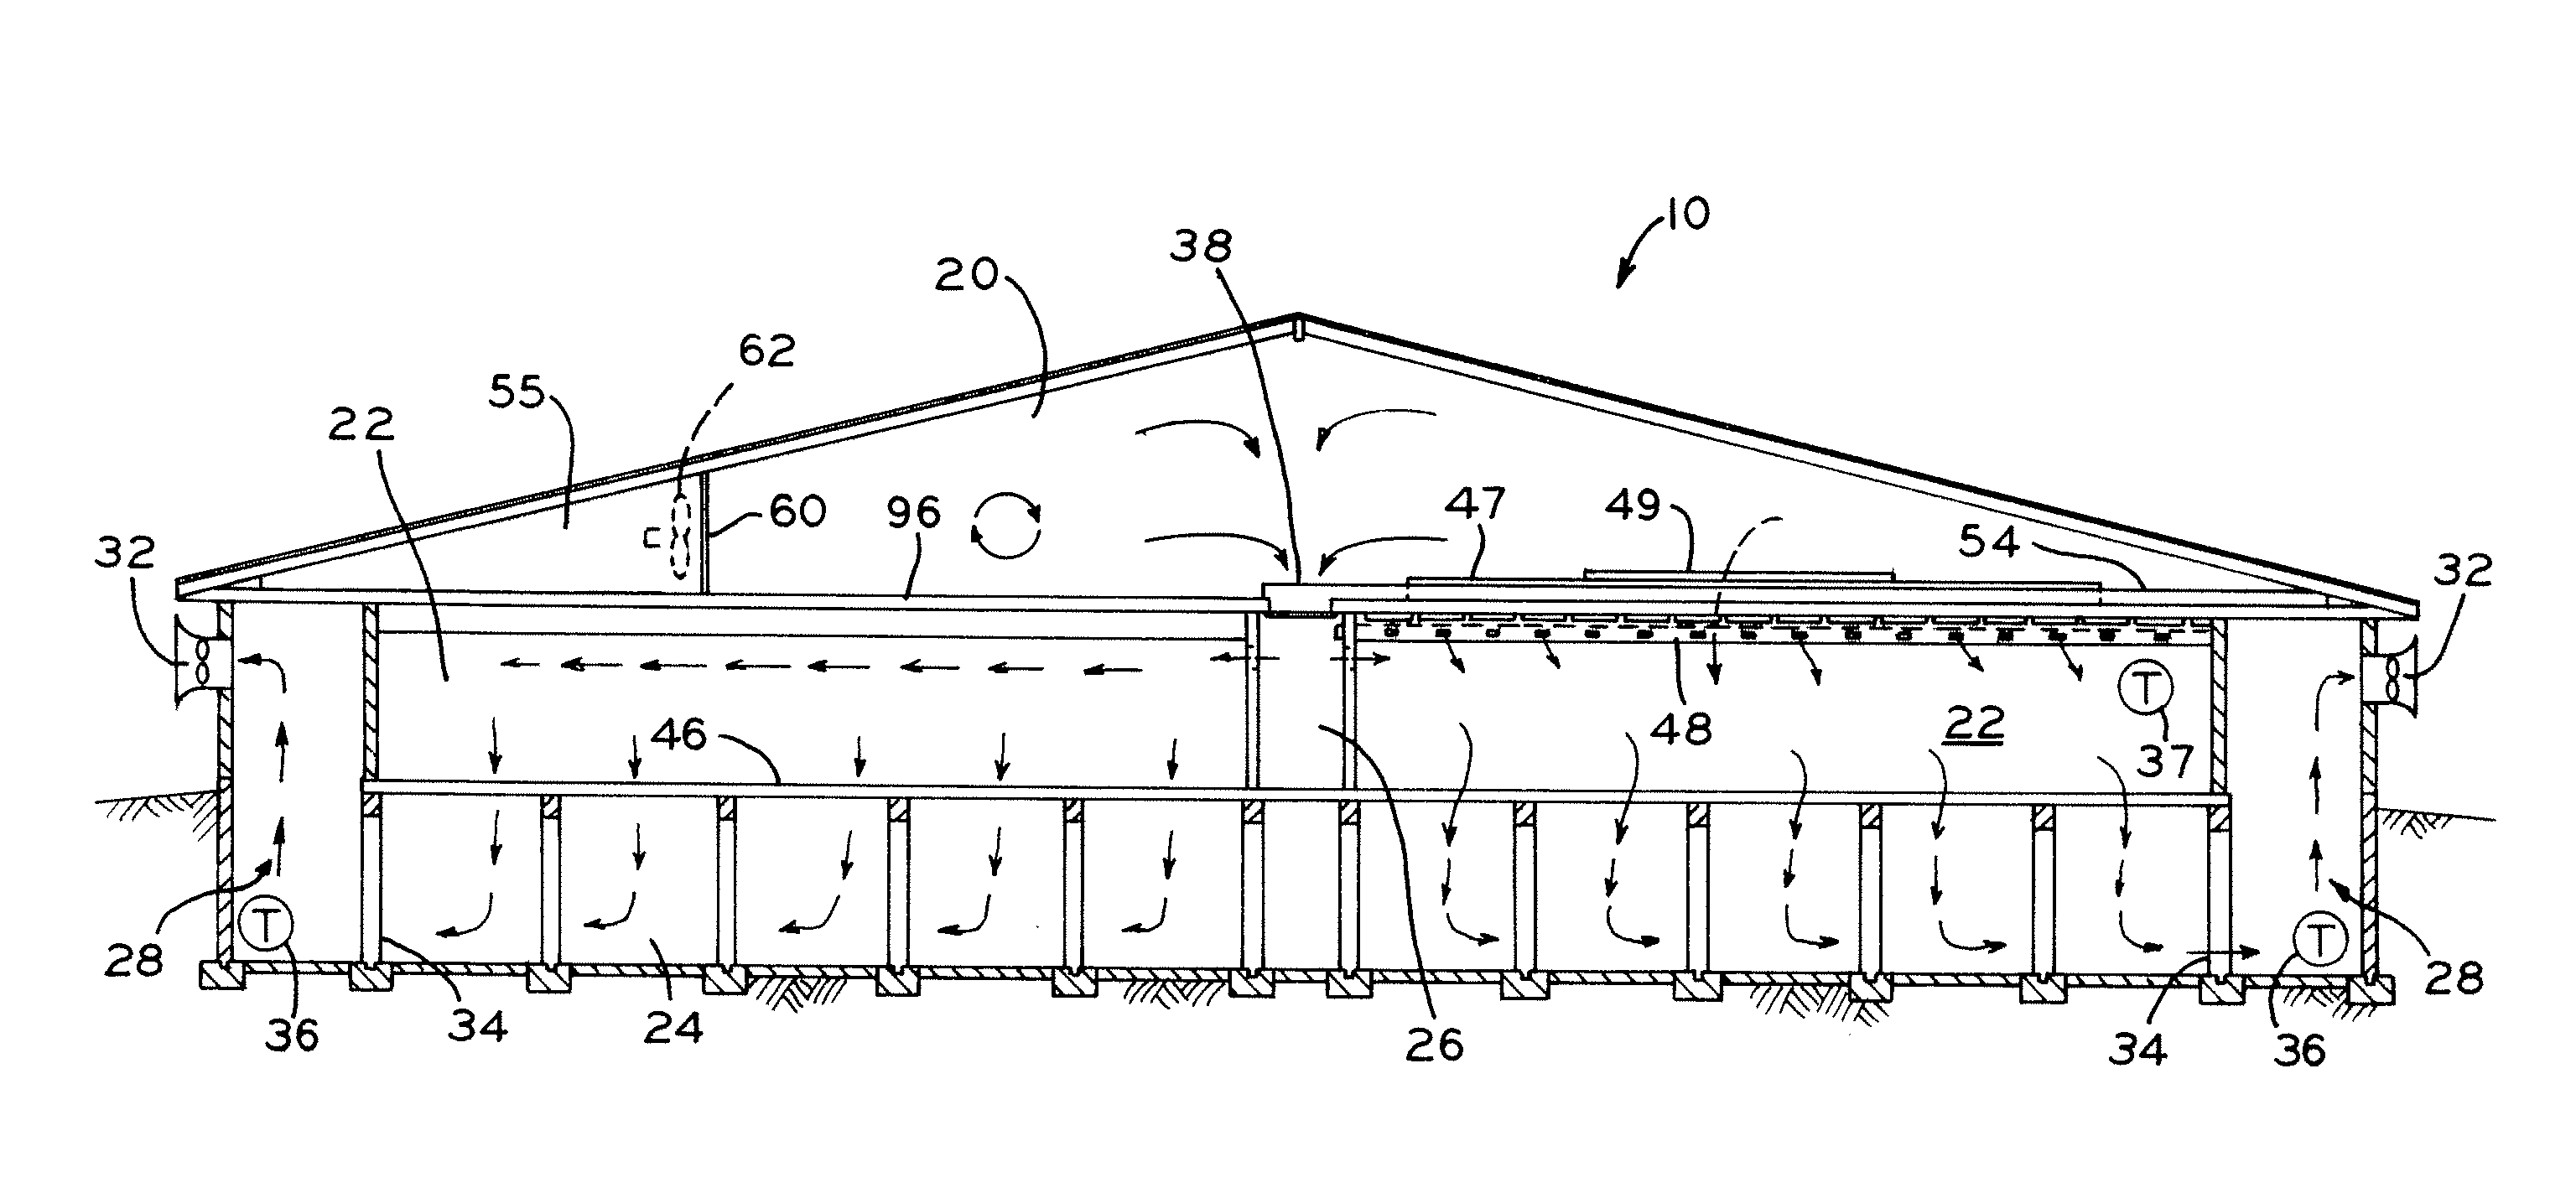 Individual room duct and ventilation system for livestock production building